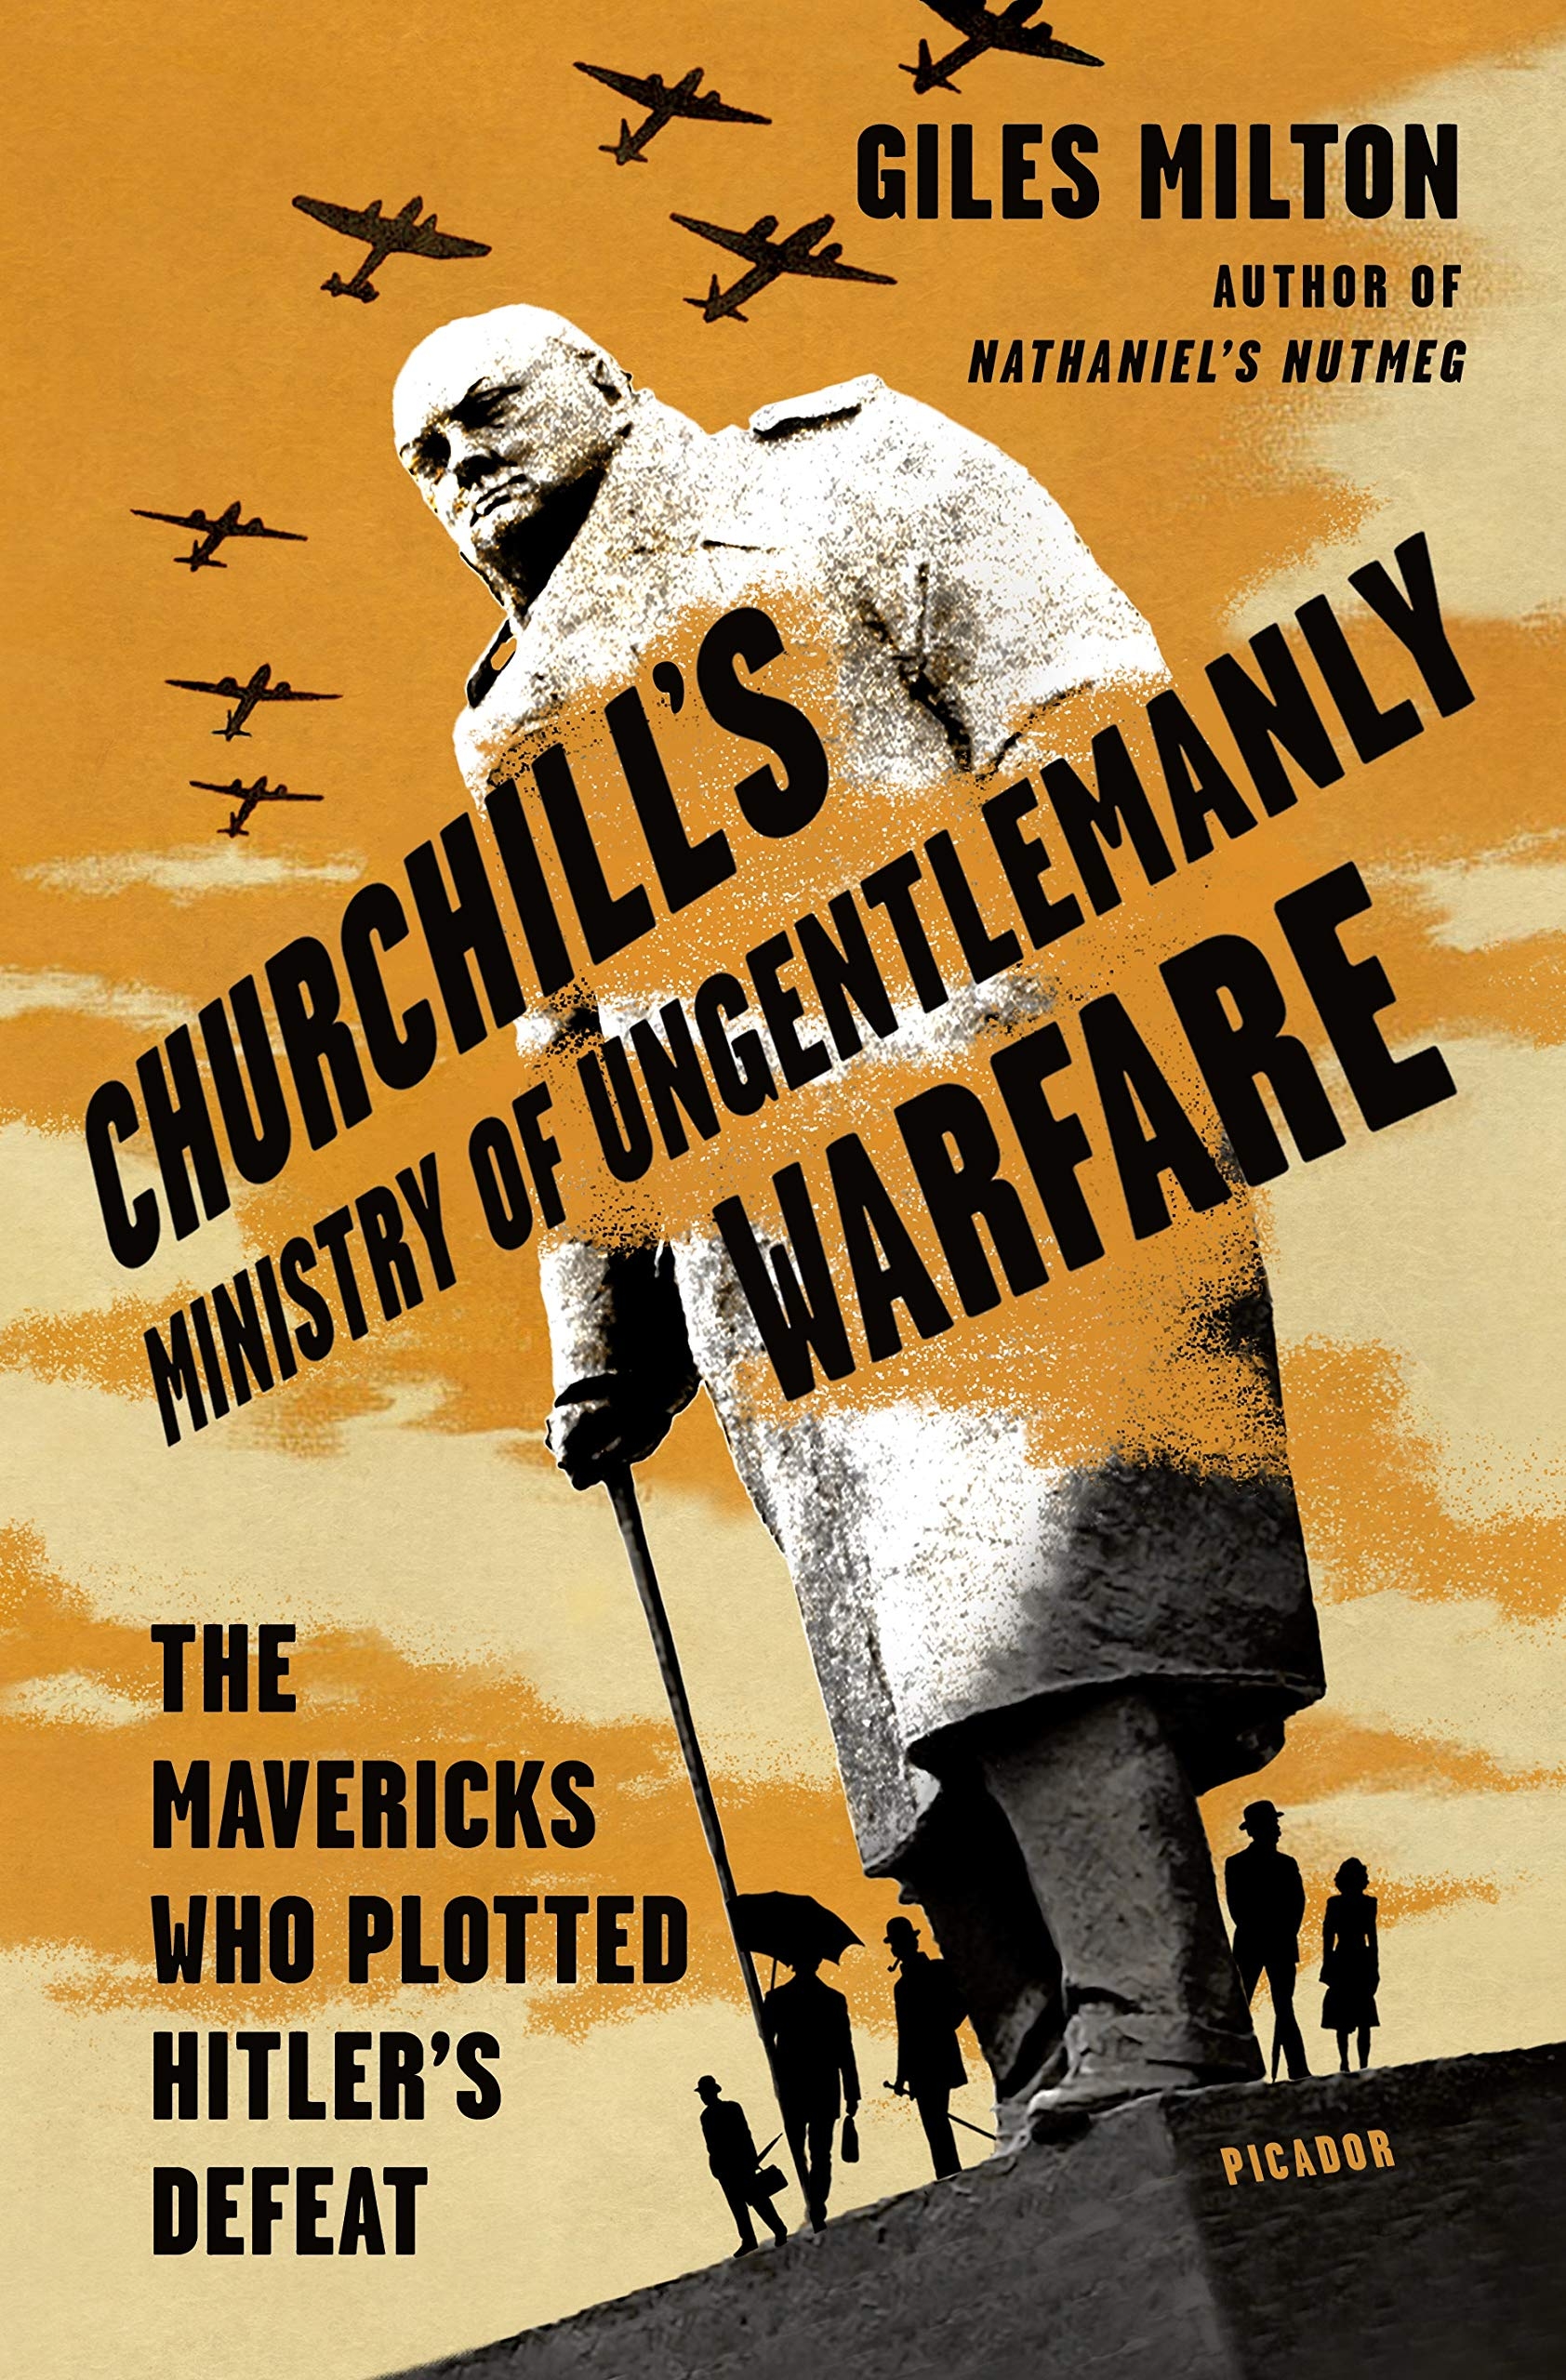 ‘Winston Churchill’s Ministry Of Ungentlemanly Warfare’